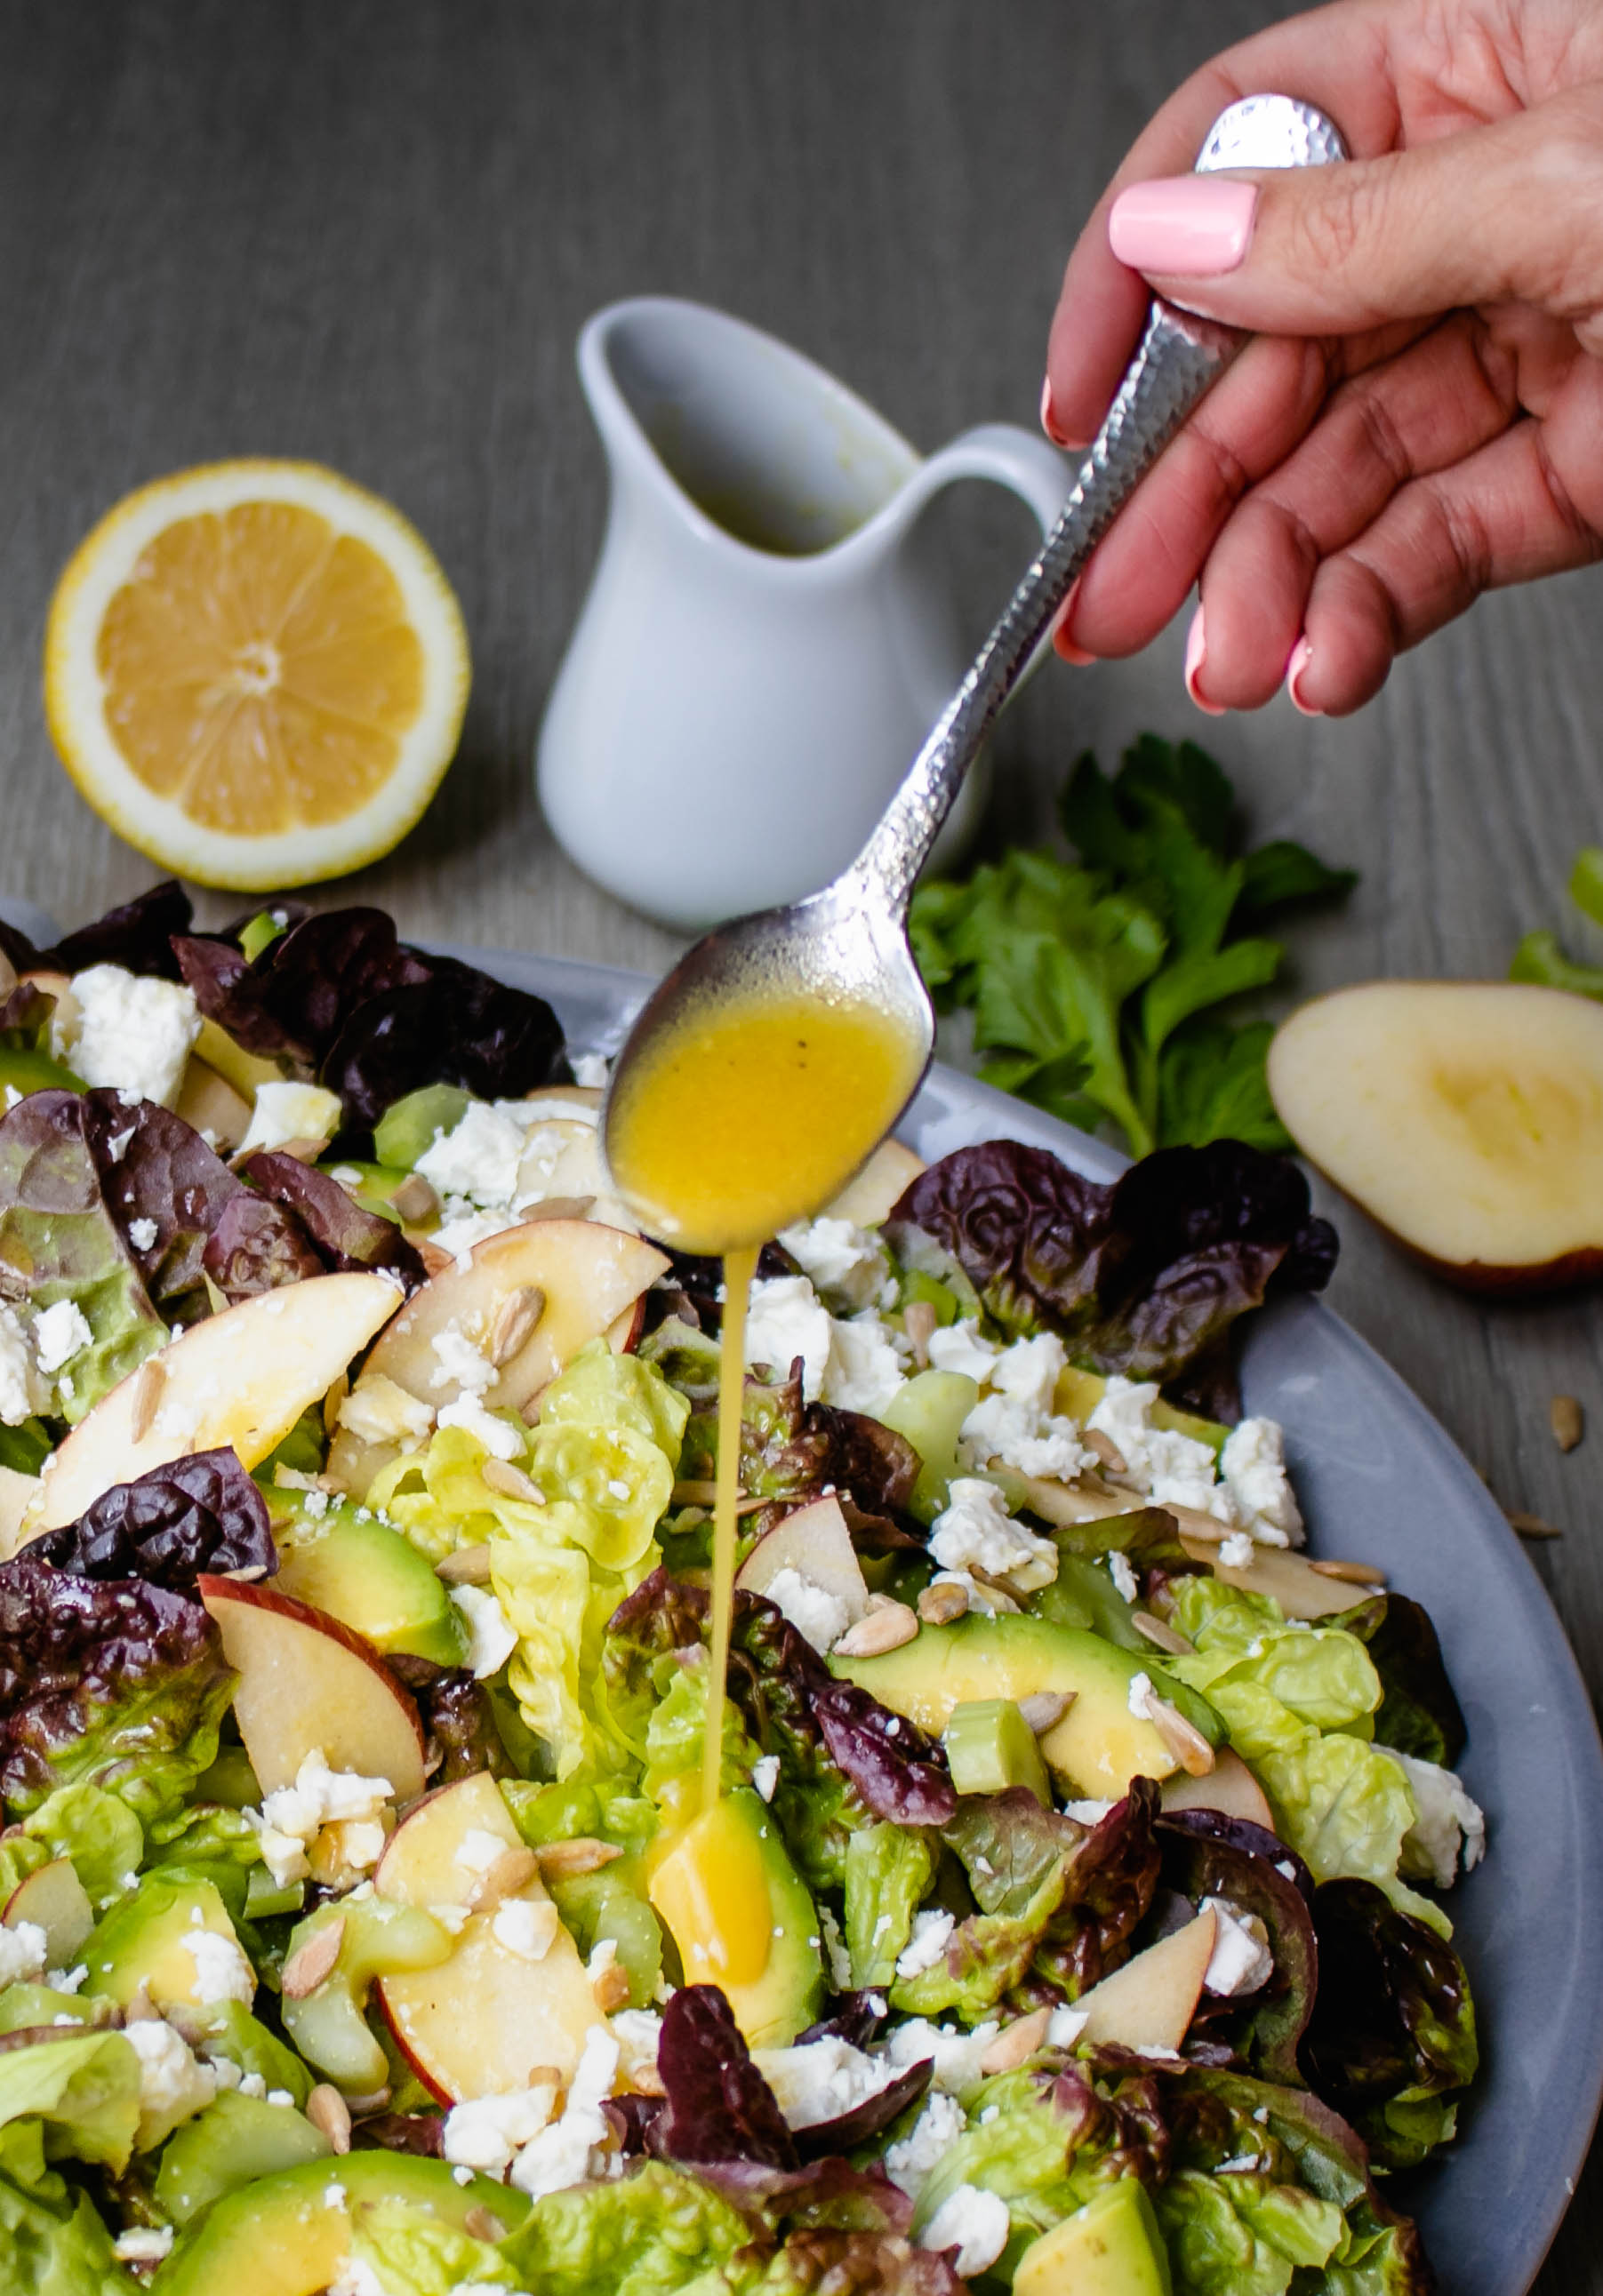 Harvest Salad with Apple, Celery and Avocado